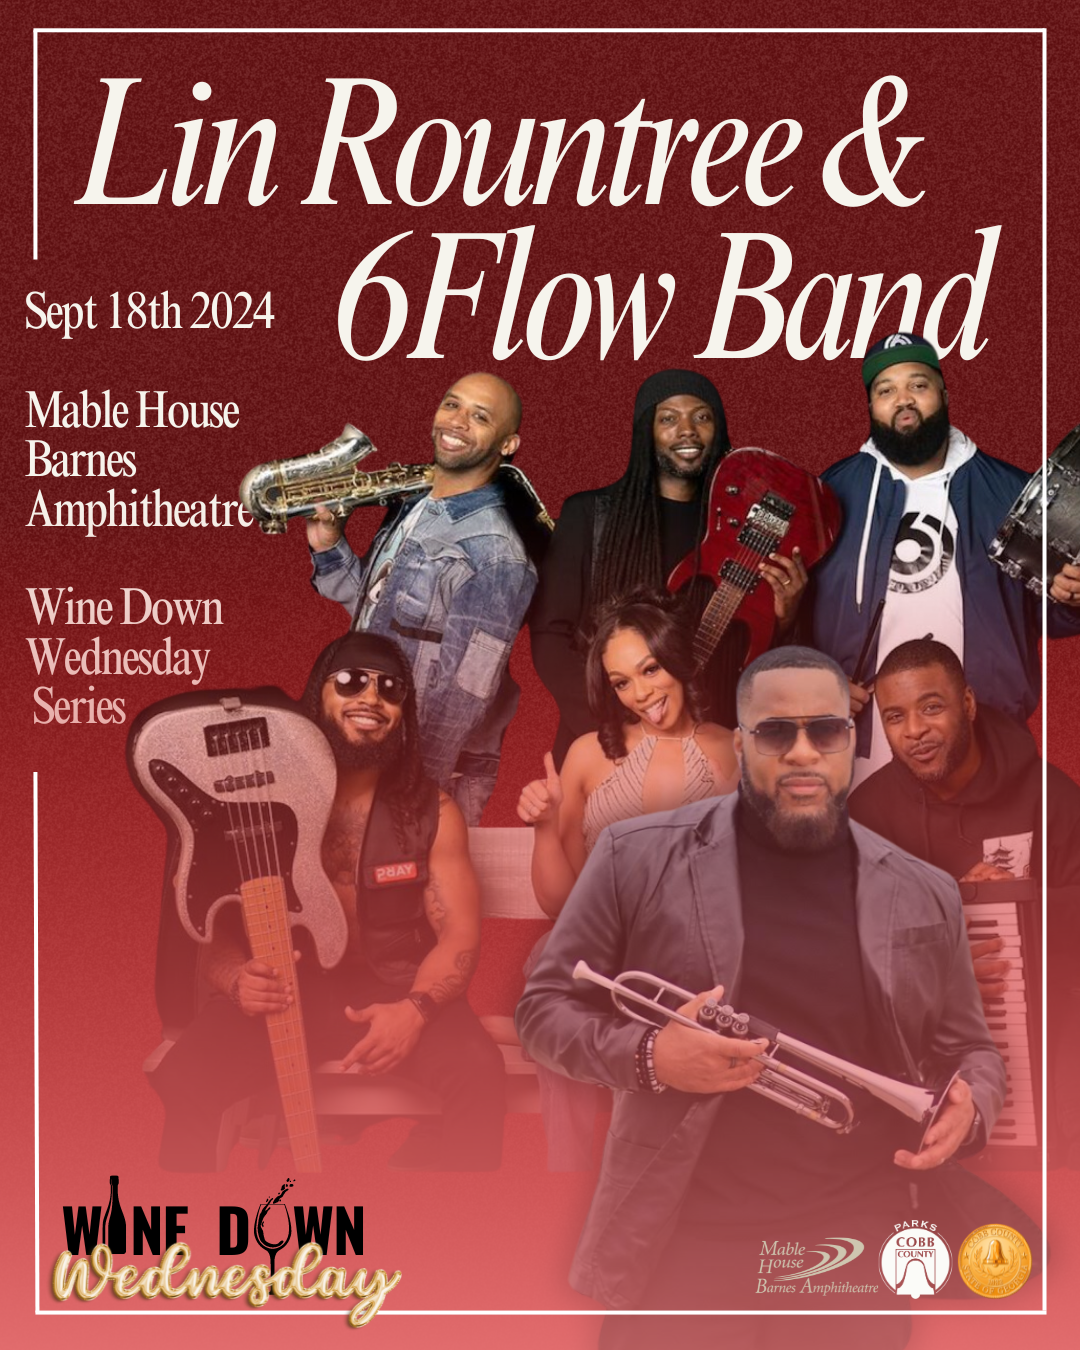 Lin Roundtree & 6flow band.png